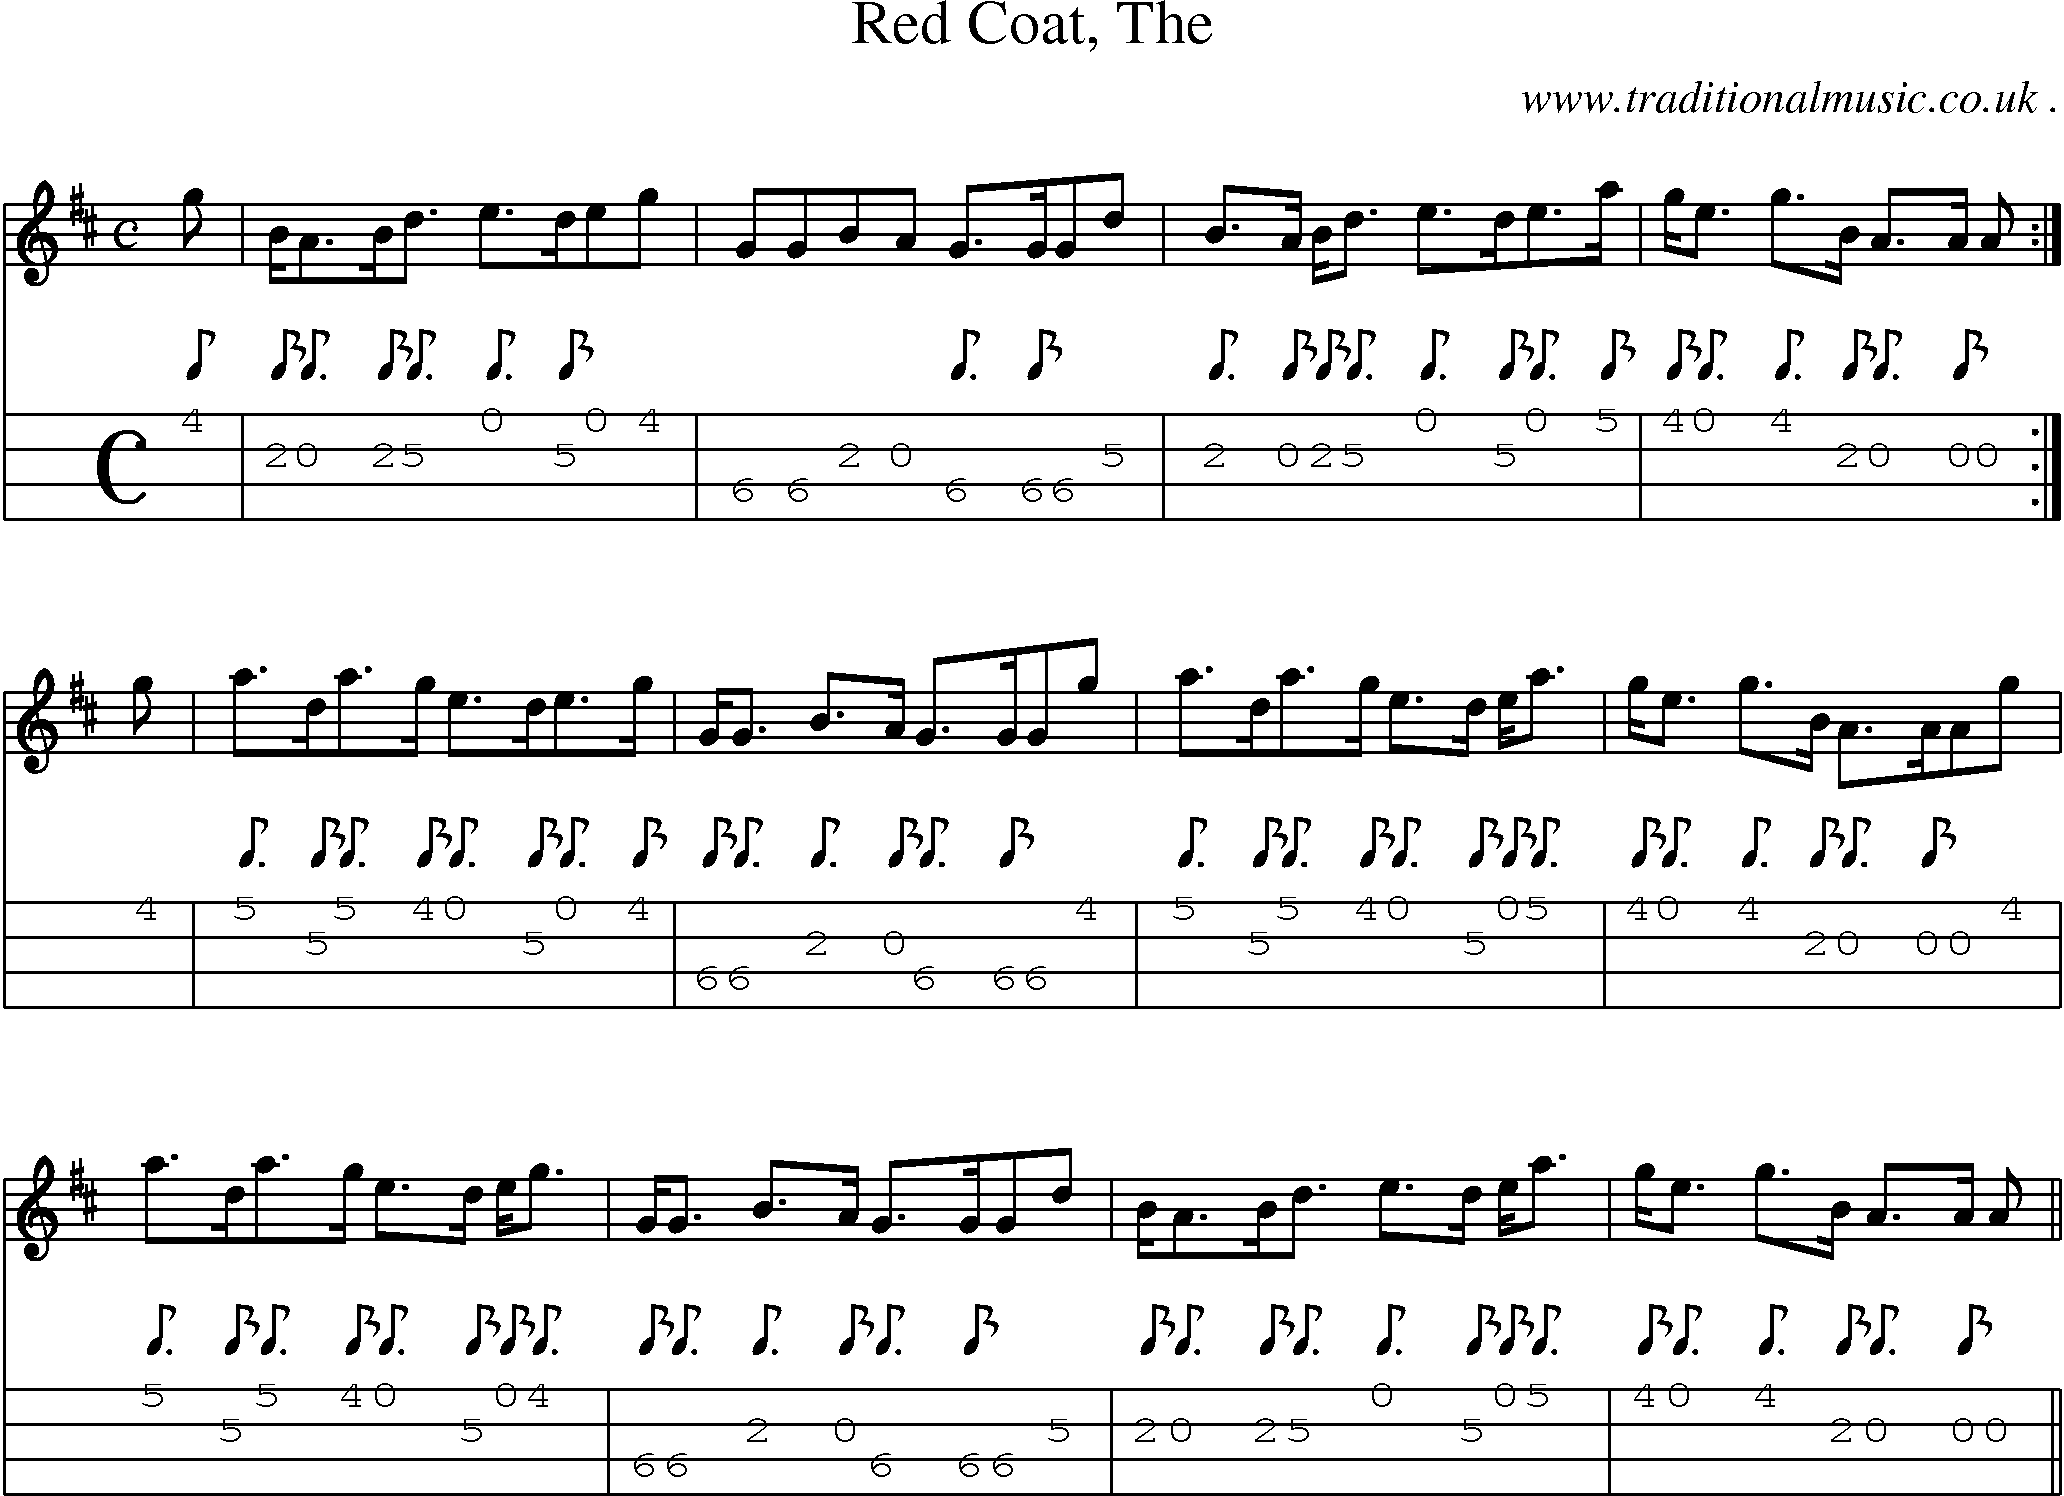 Sheet-music  score, Chords and Mandolin Tabs for Red Coat The